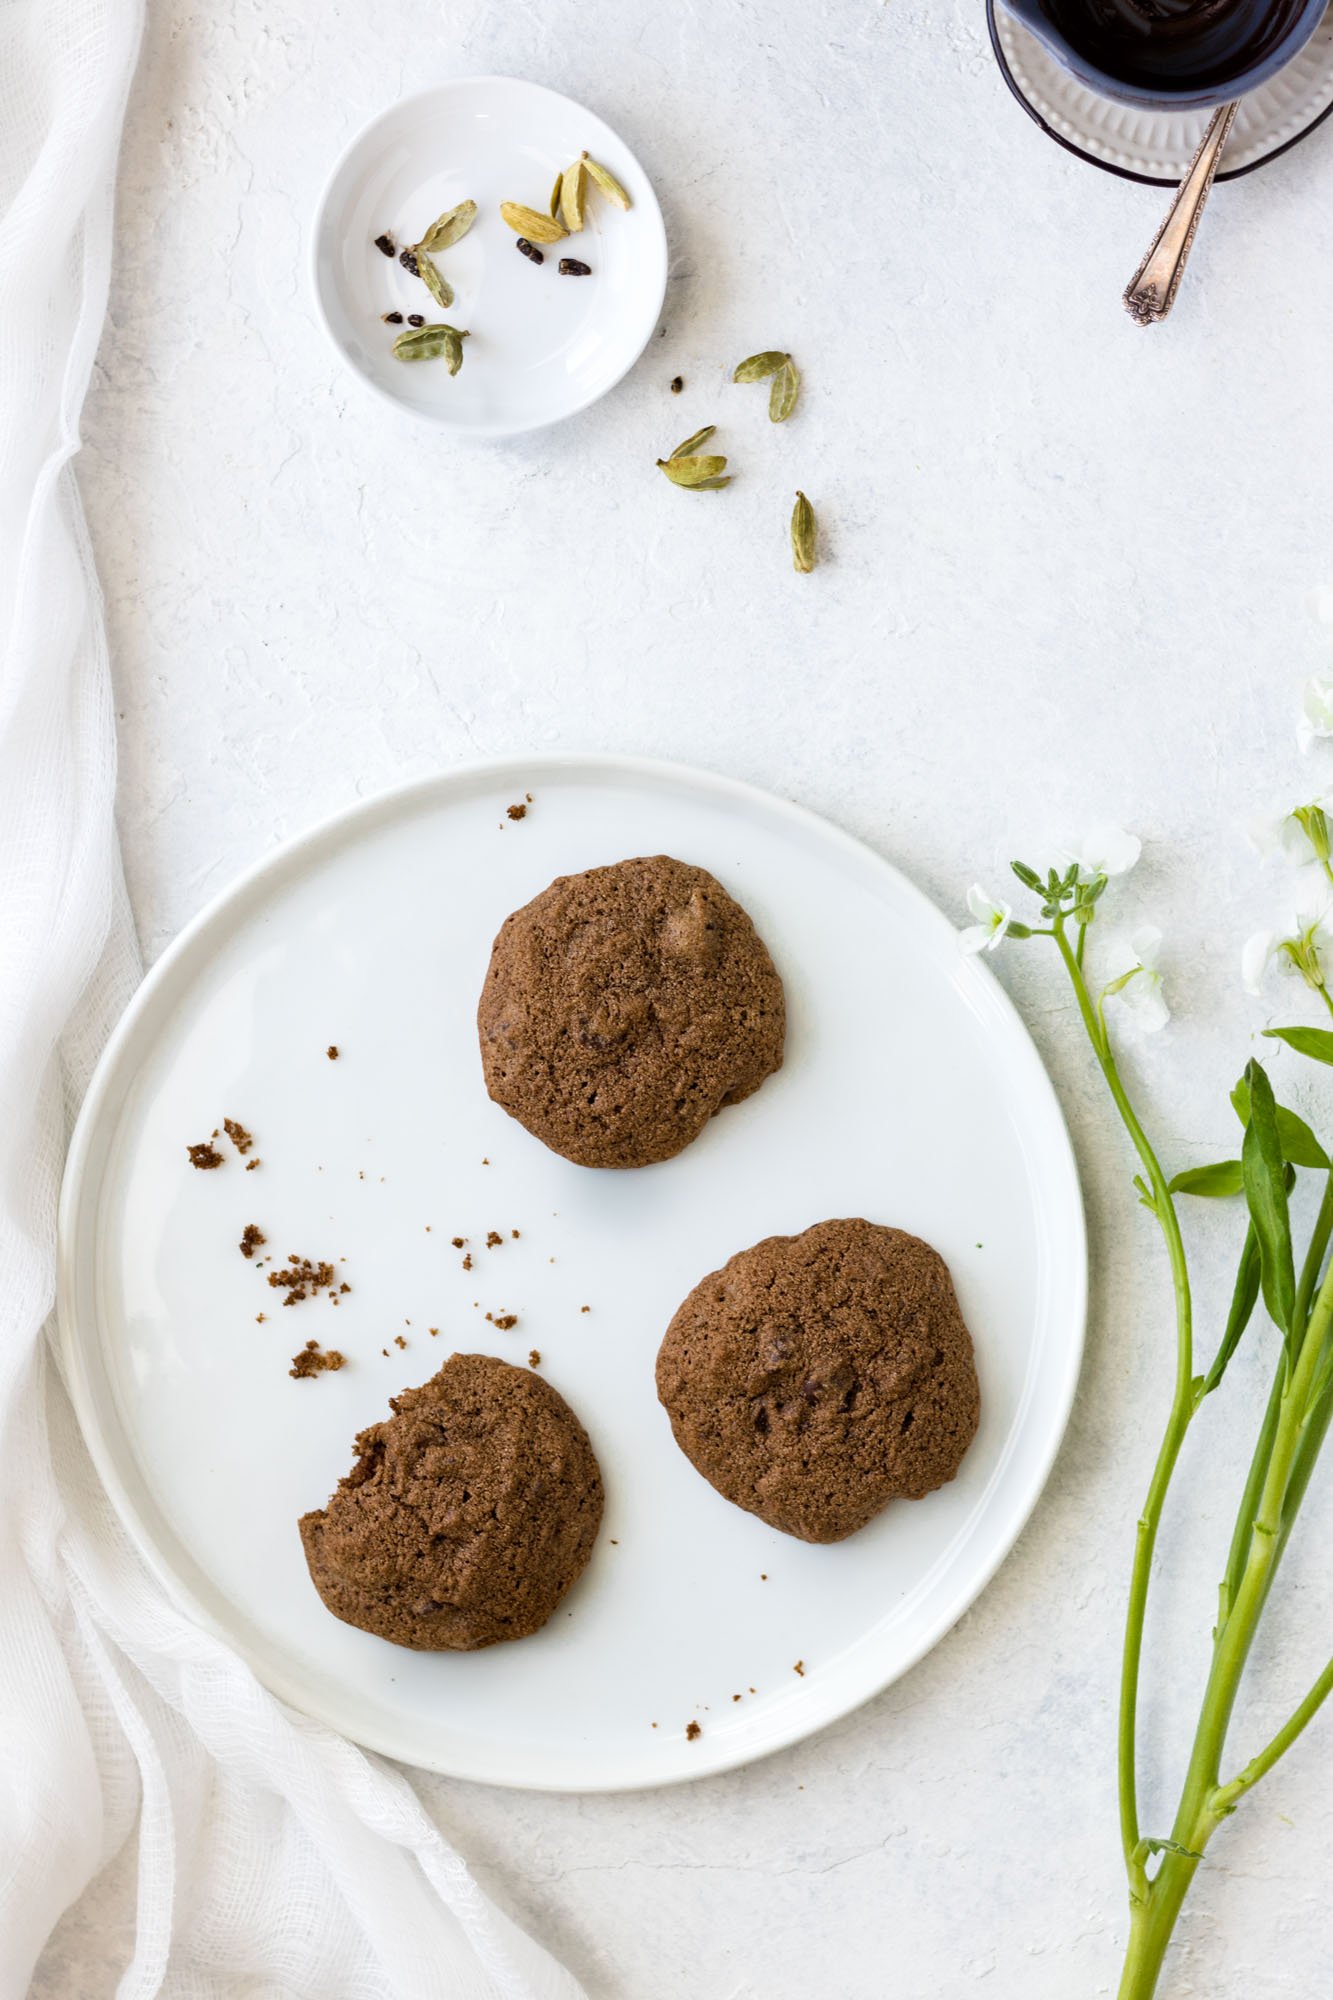 Three Gluten-Free Double Chocolate Cardamom Cookies on a white plate with some crumbs.